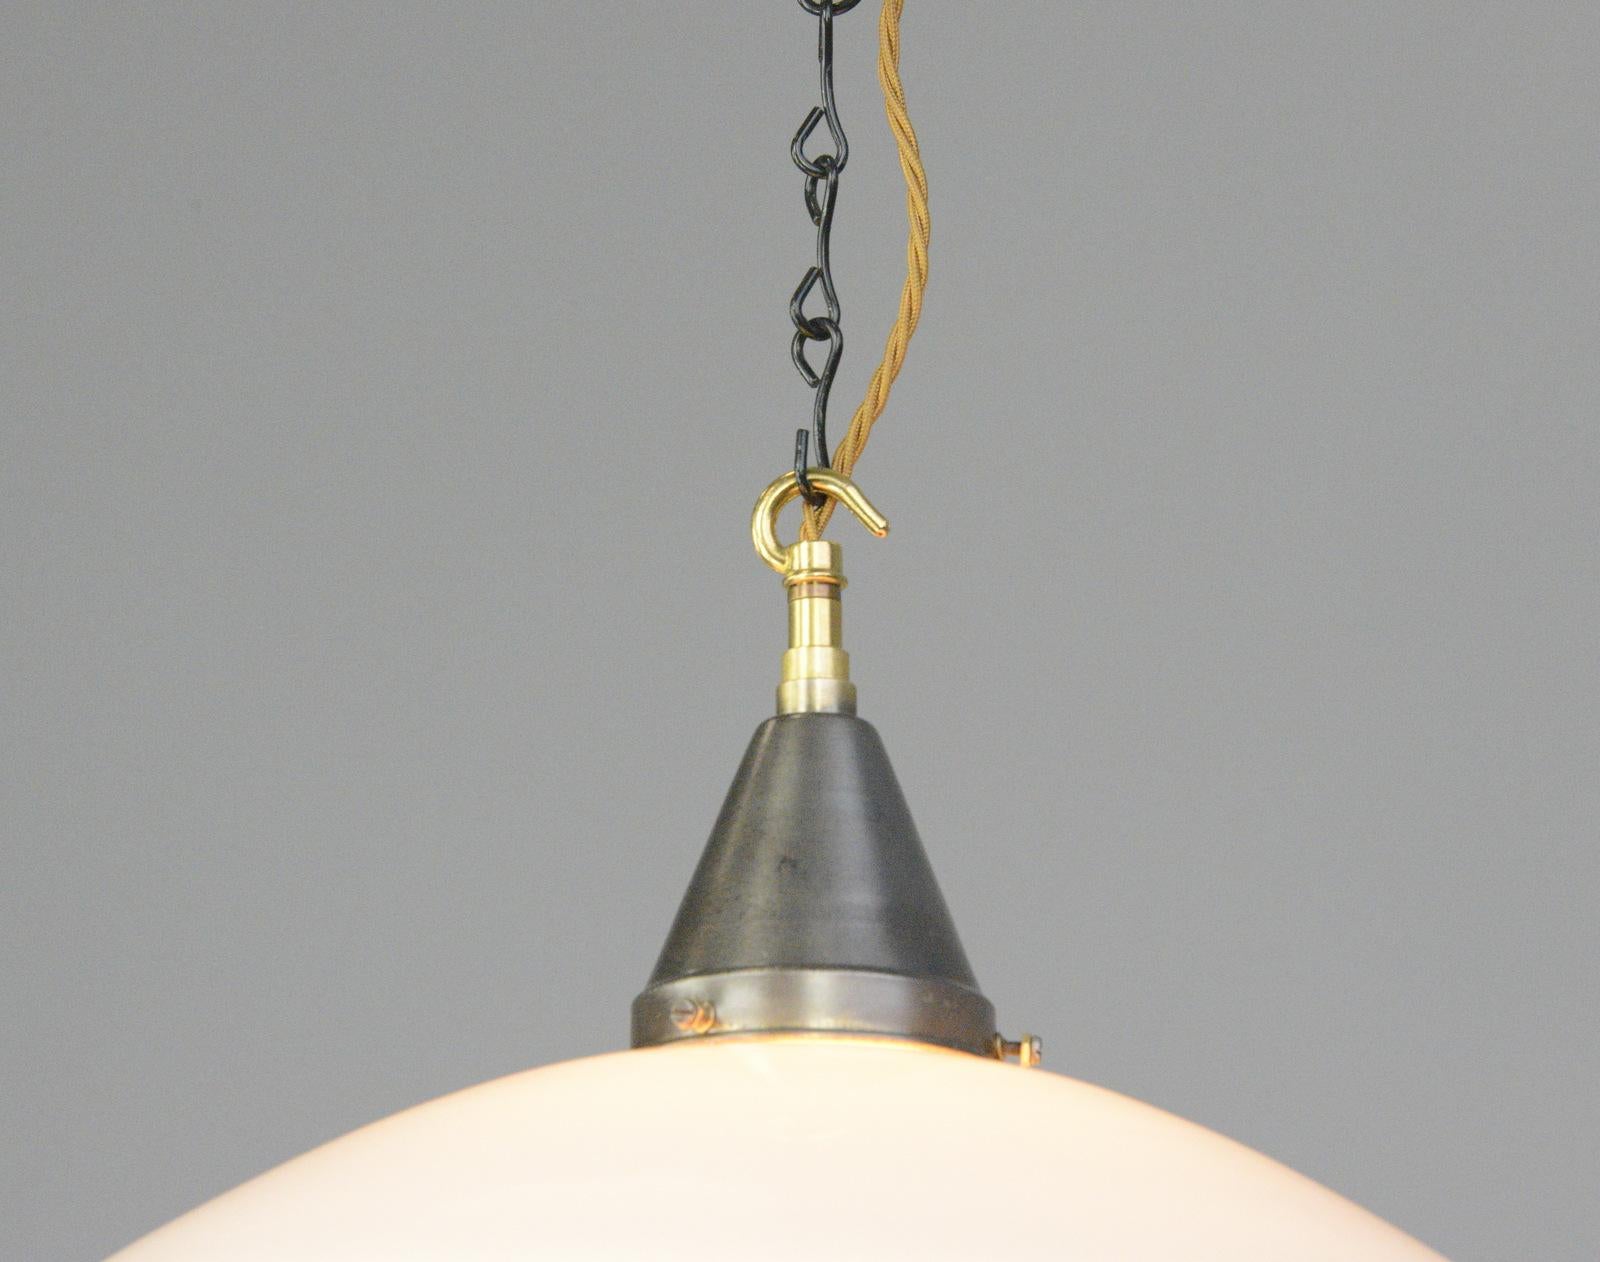 German Sistrah P4 Pendant Lights by Otto Muller Circa 1930s For Sale